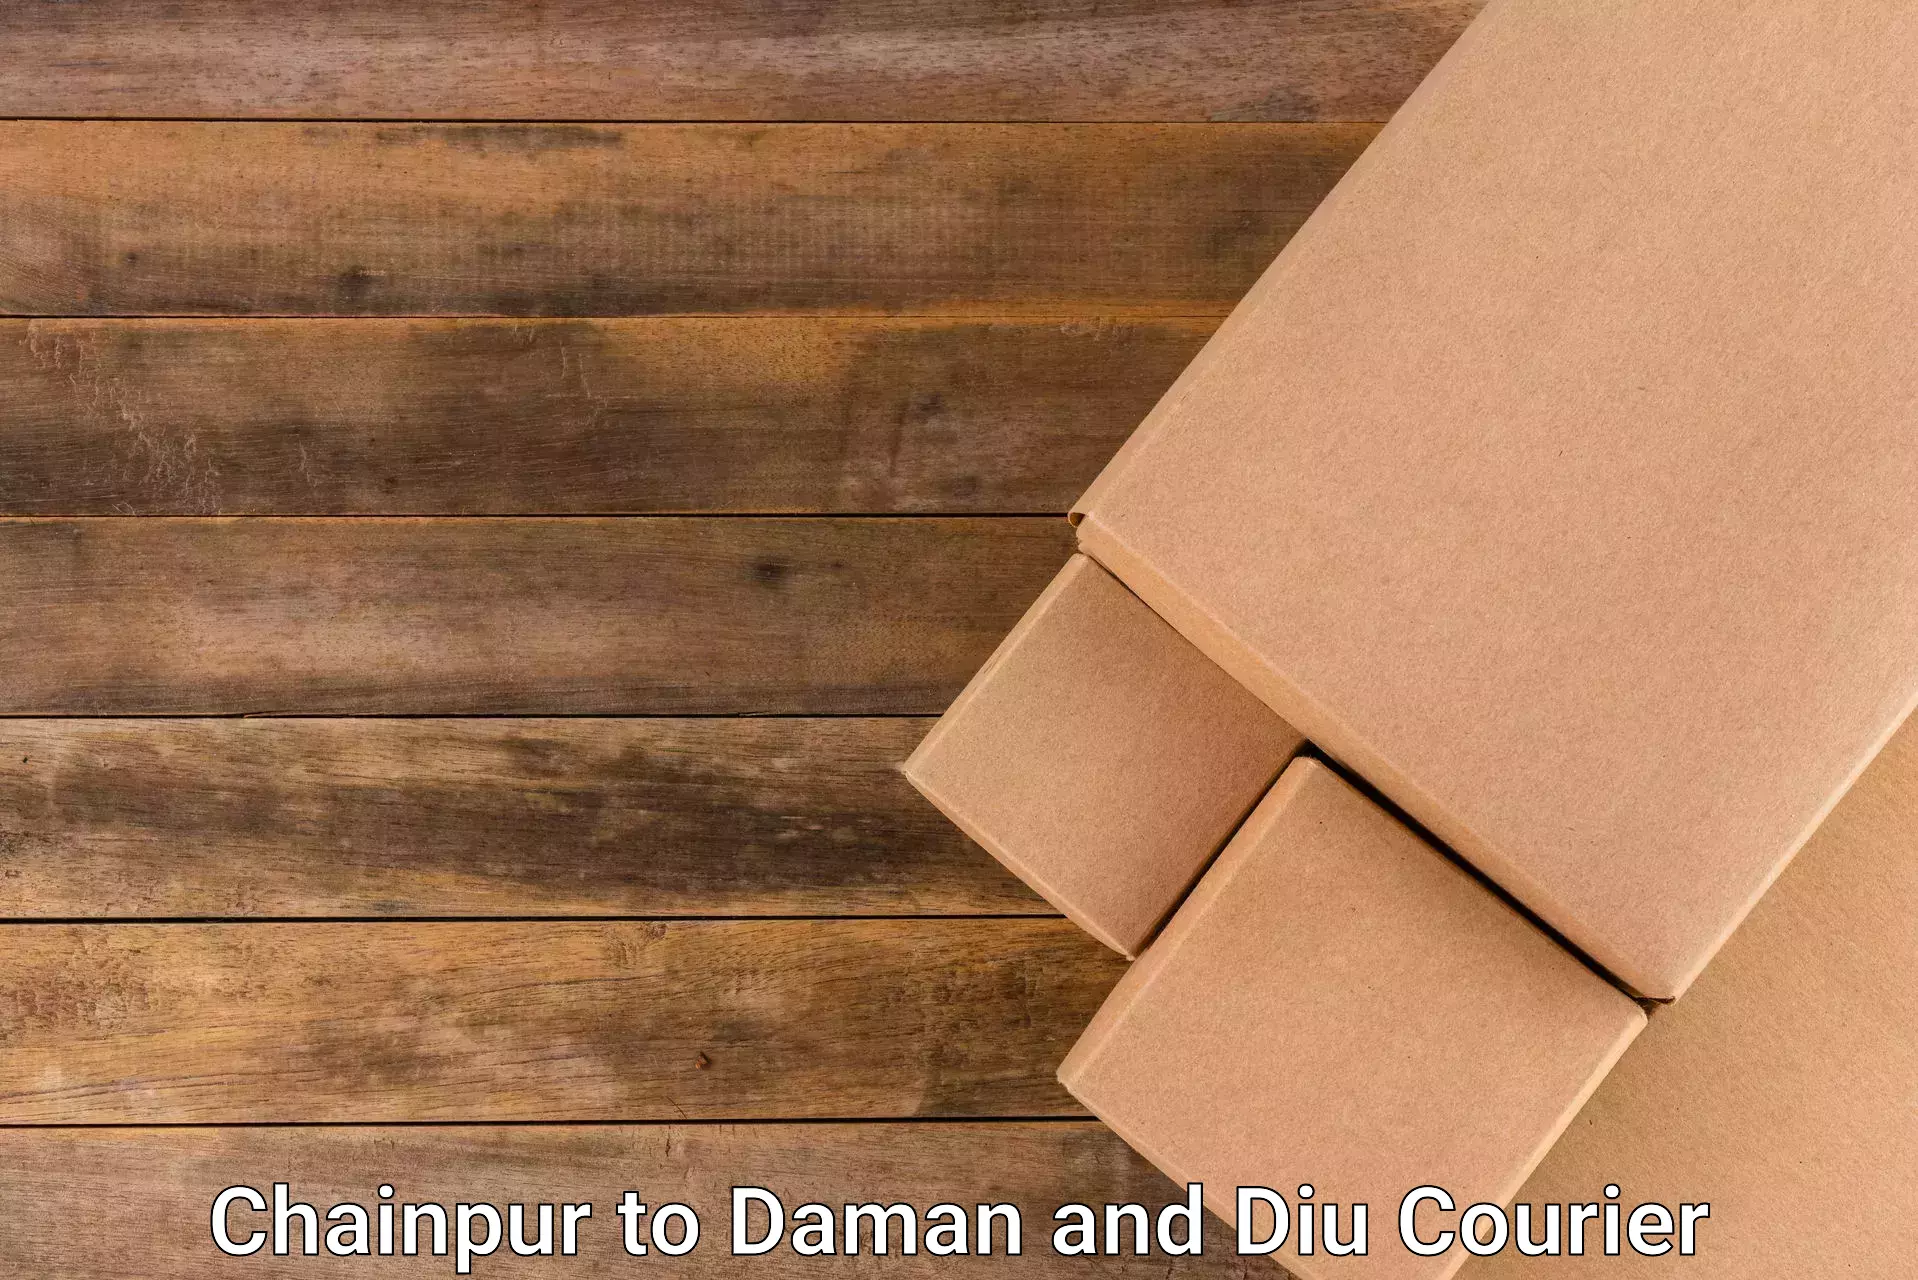 Seamless shipping experience Chainpur to Daman